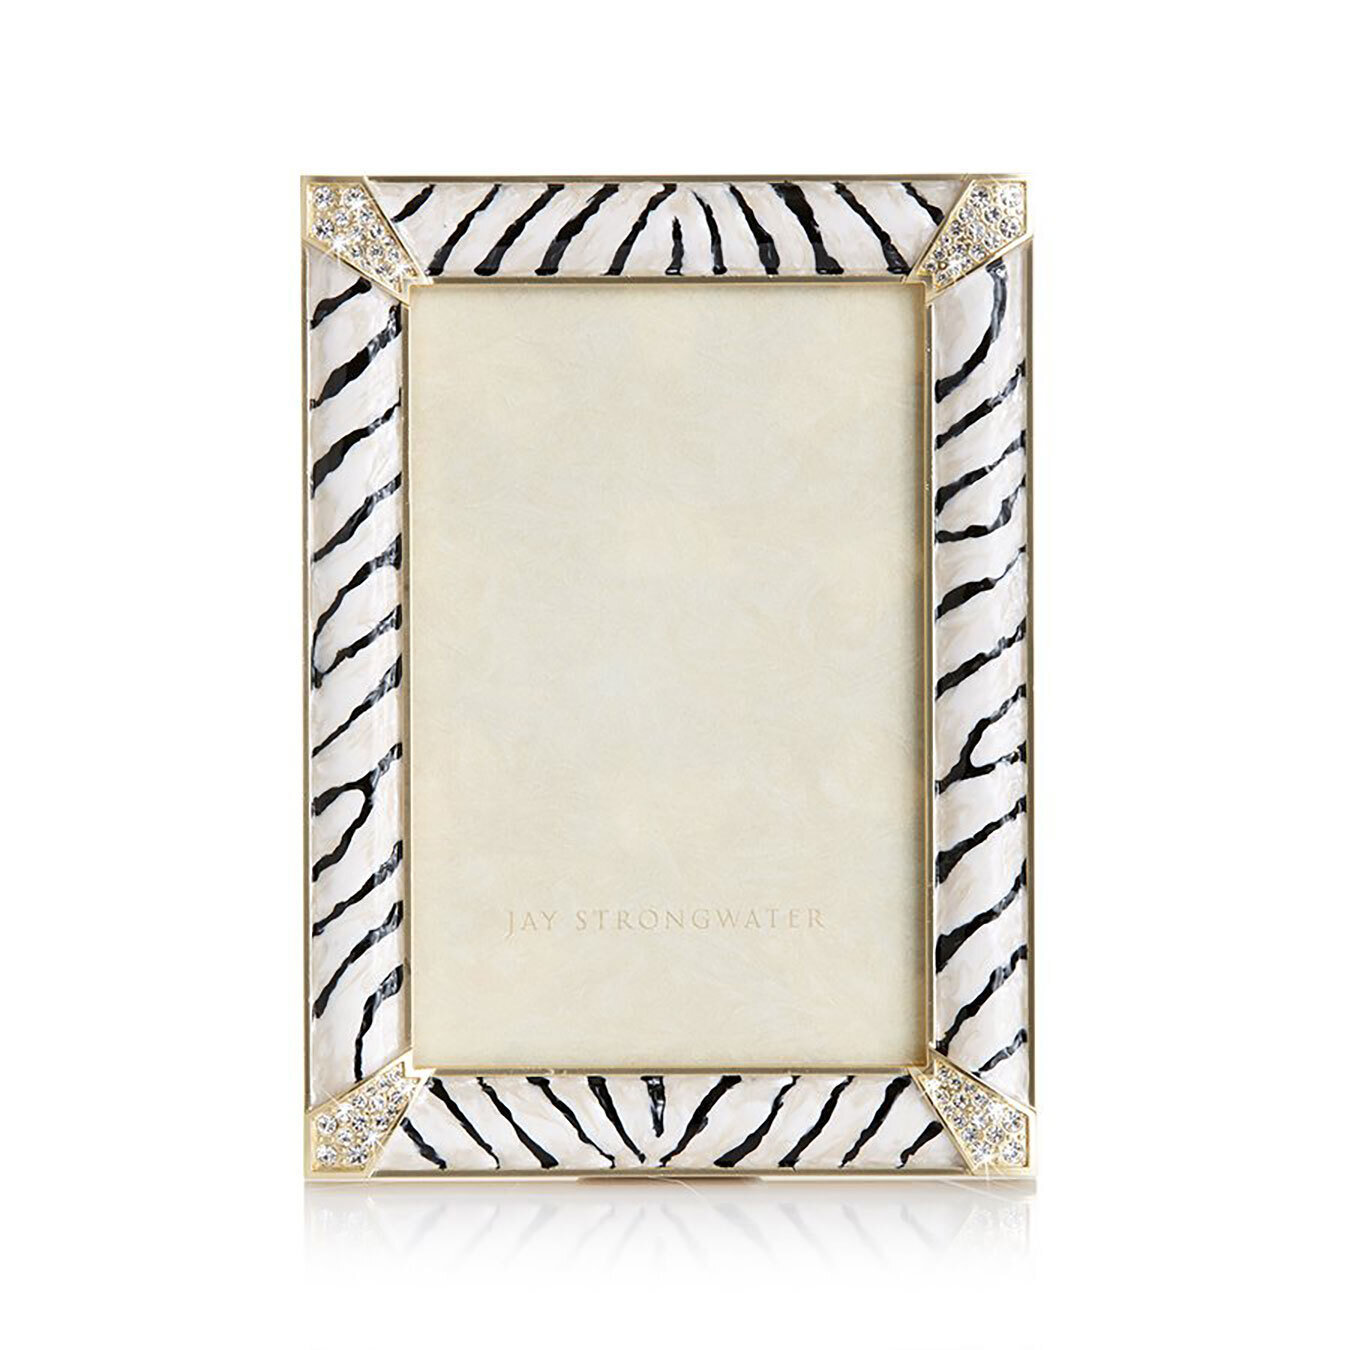 Jay Strongwater Zebra Striped Pave Corner 4" x 6" Picture Frame SPF5830-280